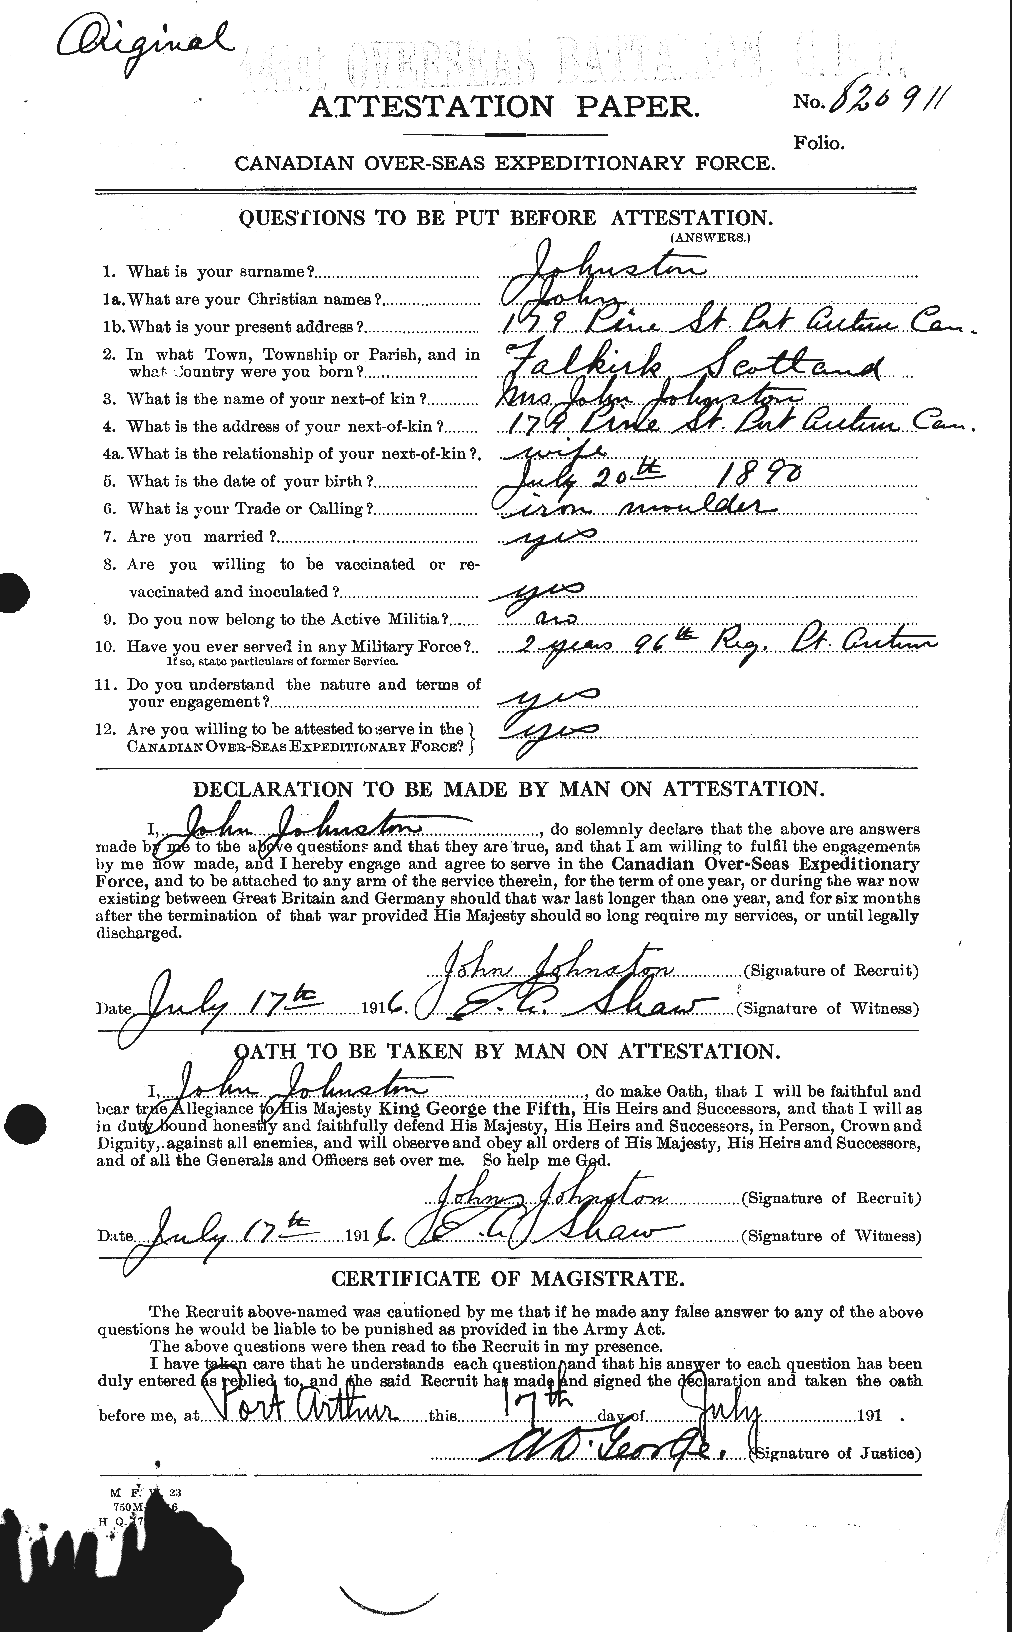 Personnel Records of the First World War - CEF 422786a